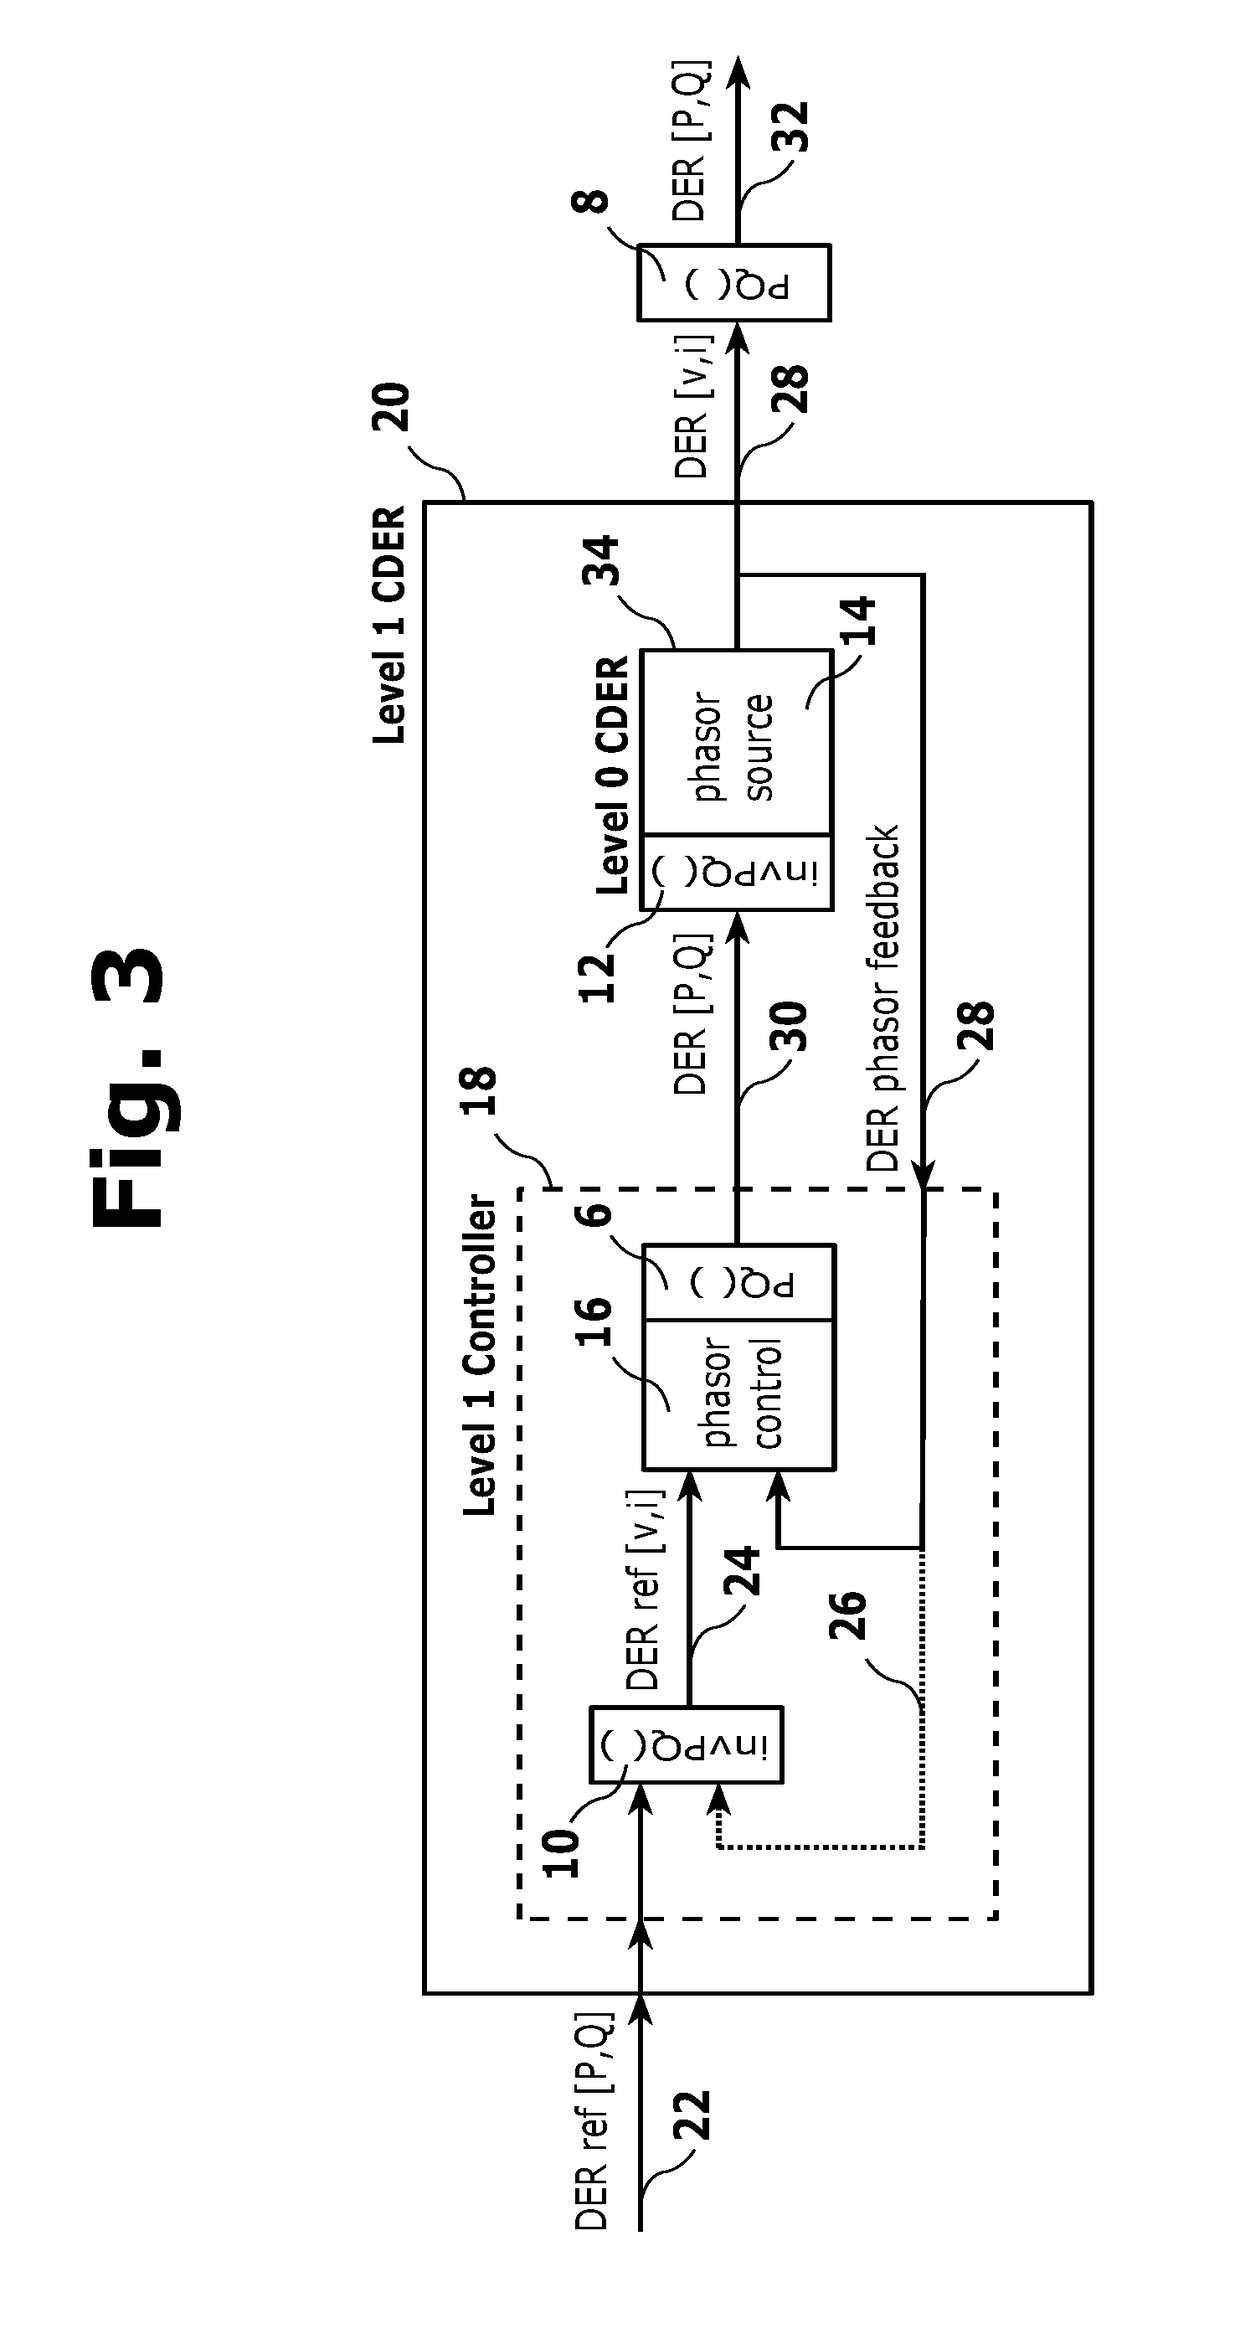 Decoupling Synchrophasor Based Control System for Multiple Distributed Energy Resources